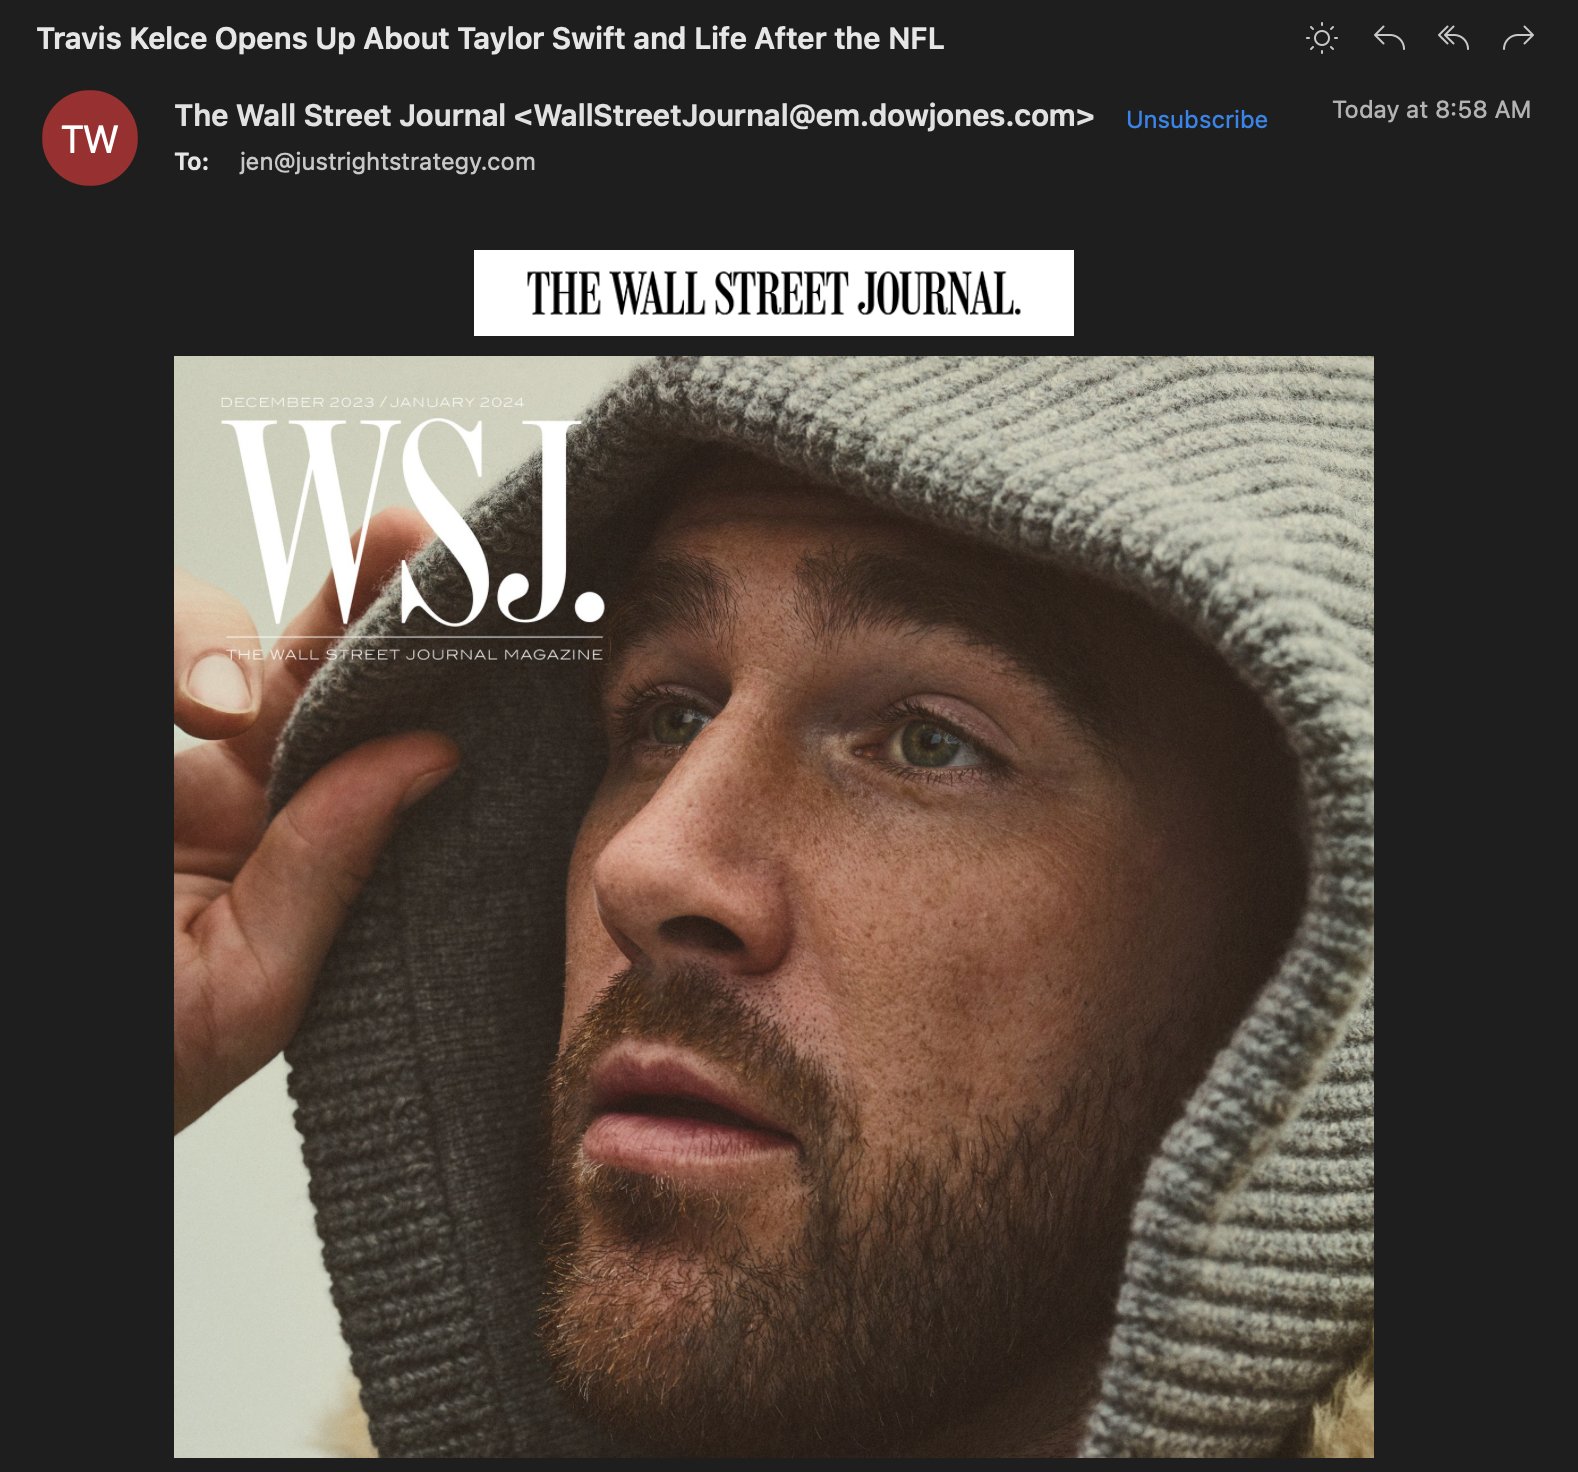 Travis Kelce Covers WSJ. Magazine December / January Issue